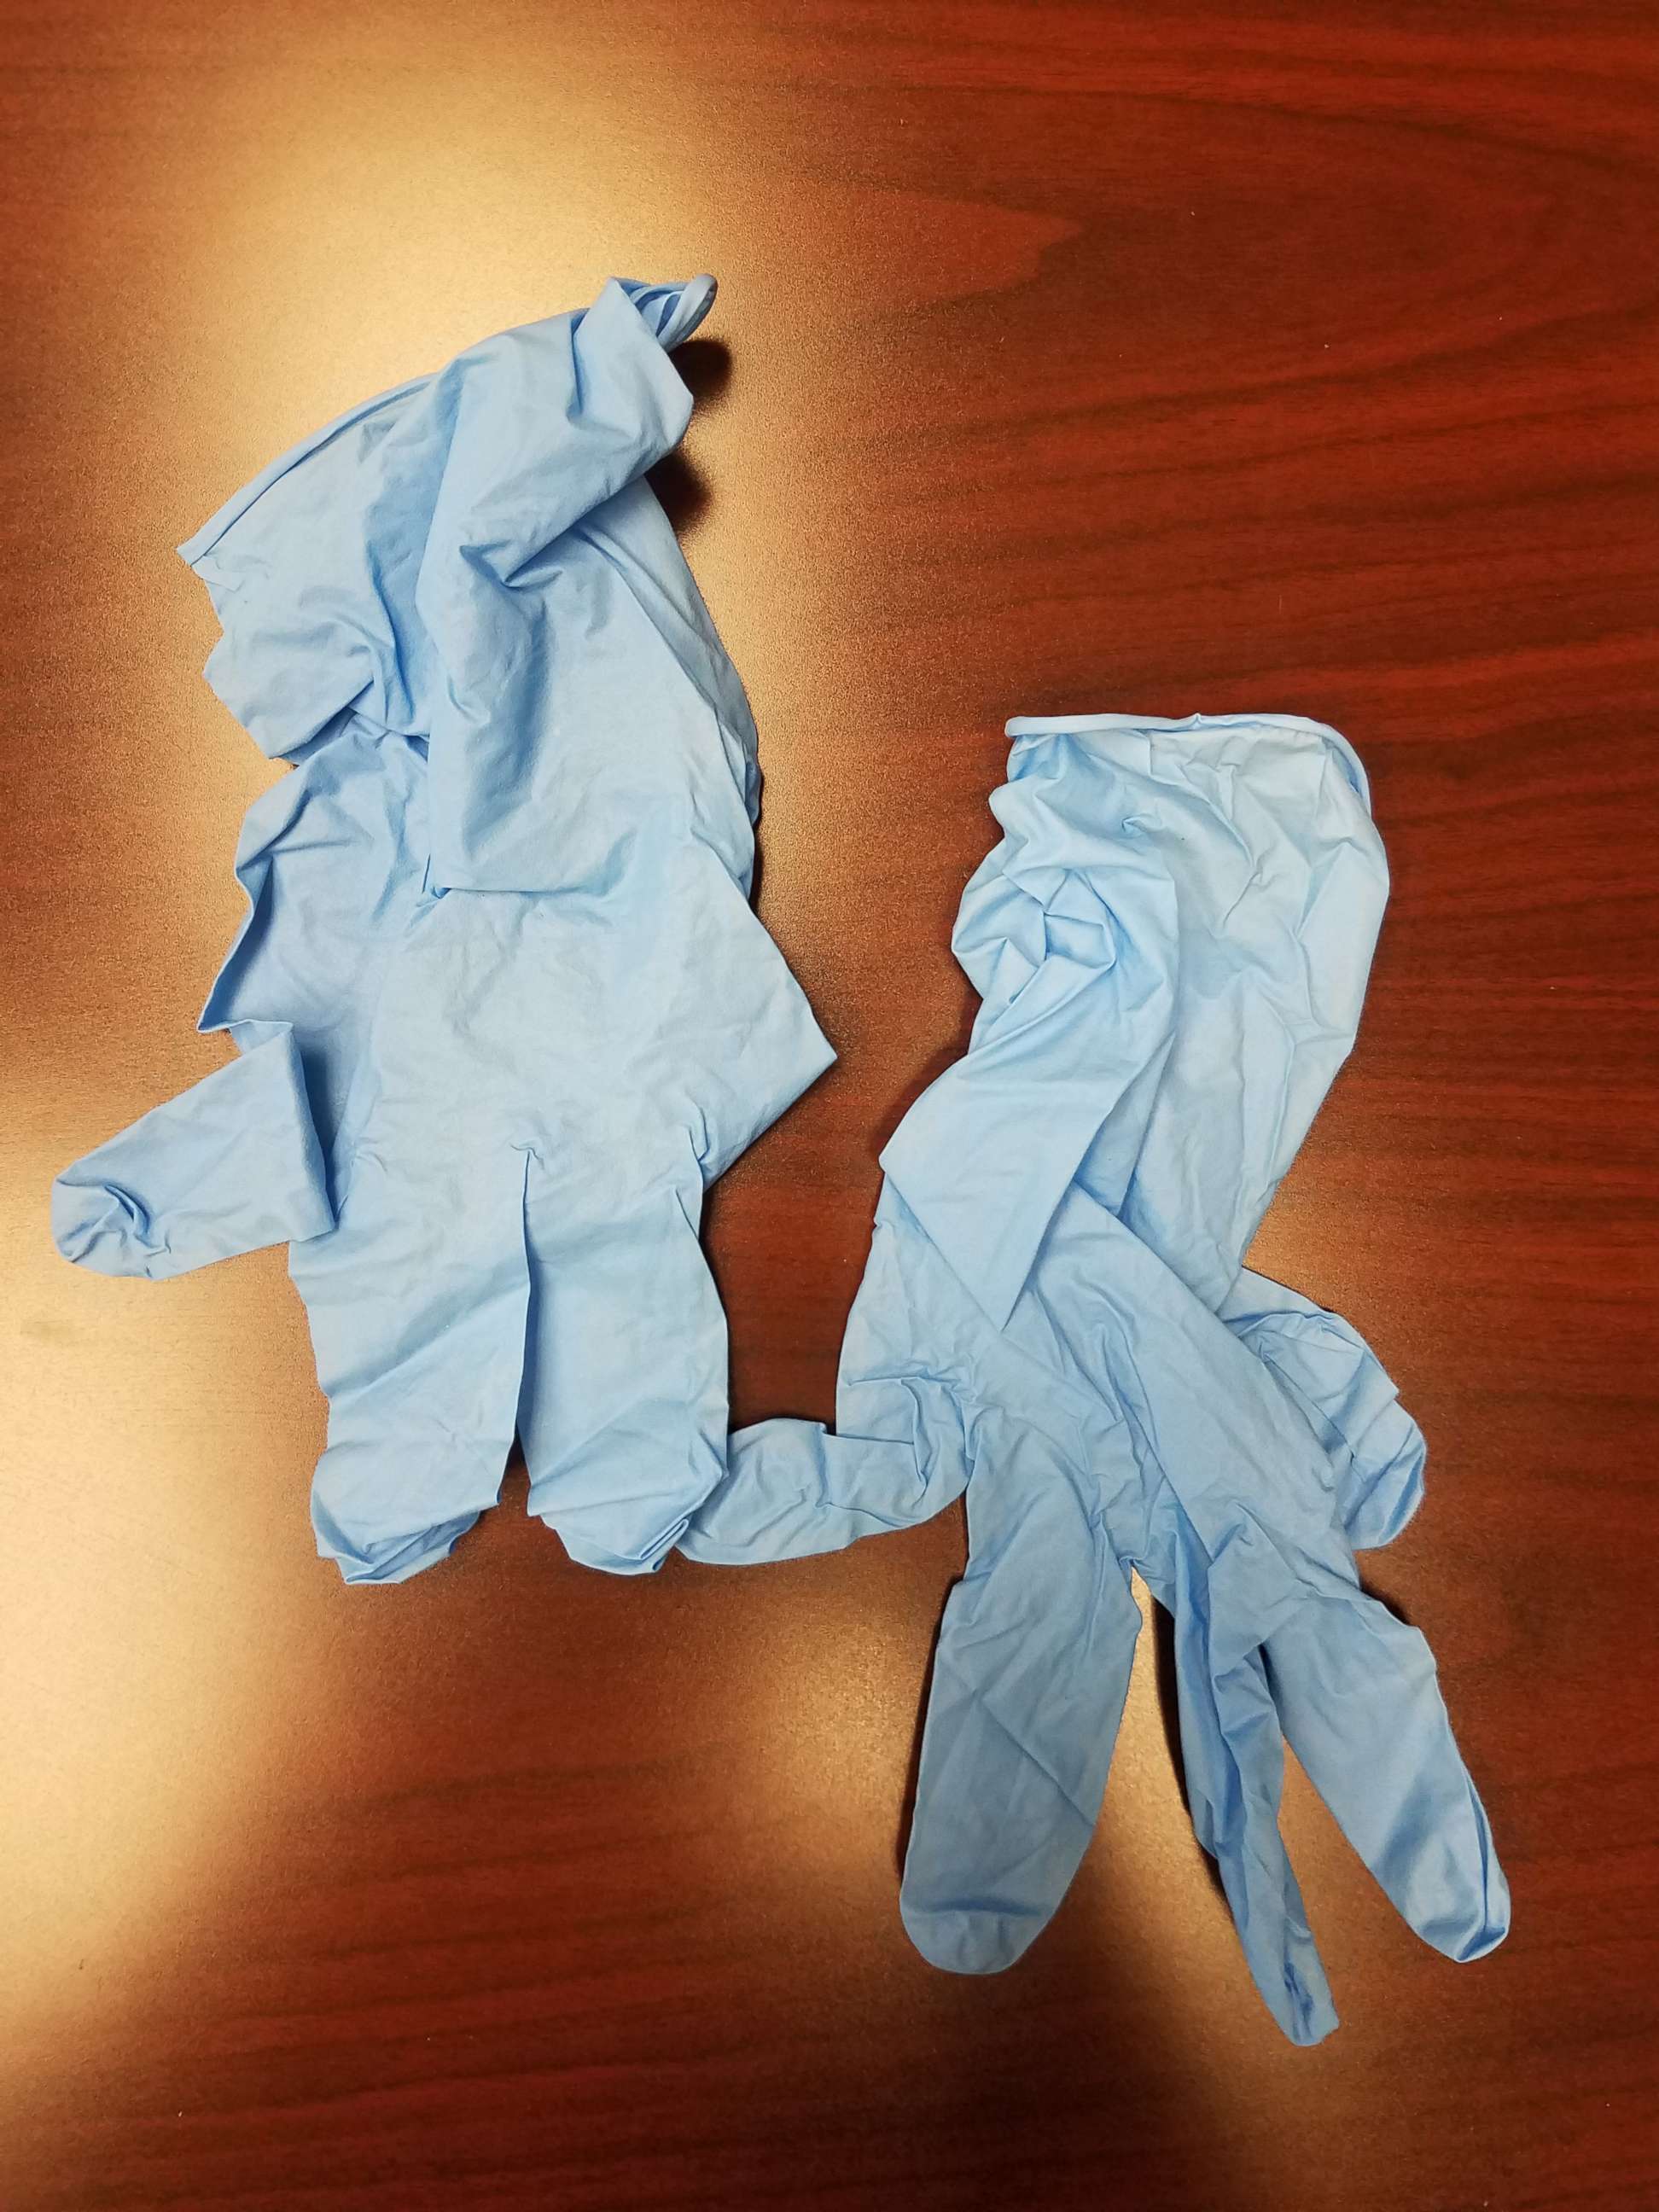 PHOTO: A pair of blue-colored gloves were sent to a Detroit woman after she complained to Samsung that her mobile devices caught fire, May 21, 2018.